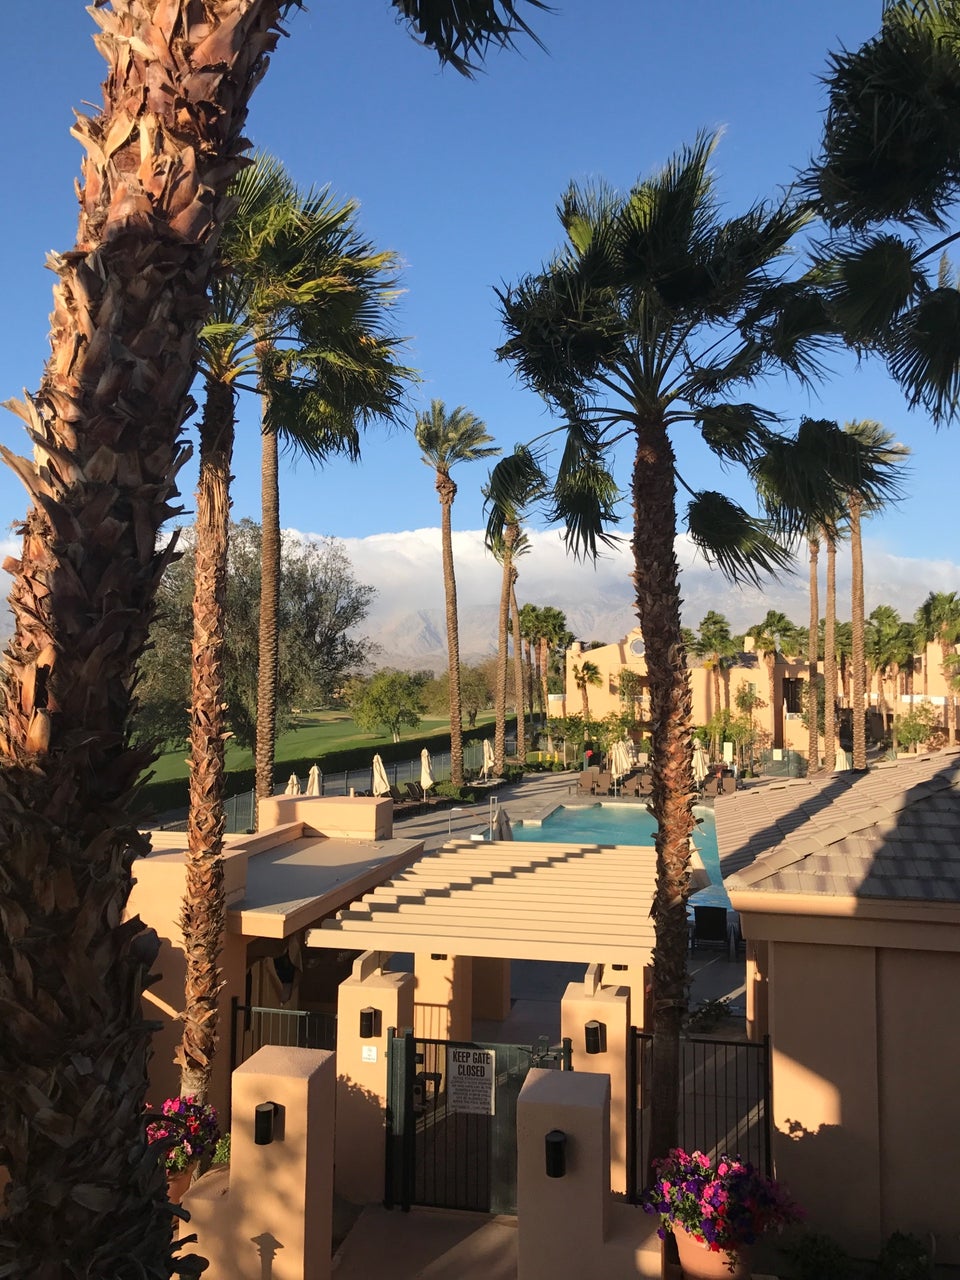 Photo of The Westin Mission Hills Resort Villas, Palm Springs